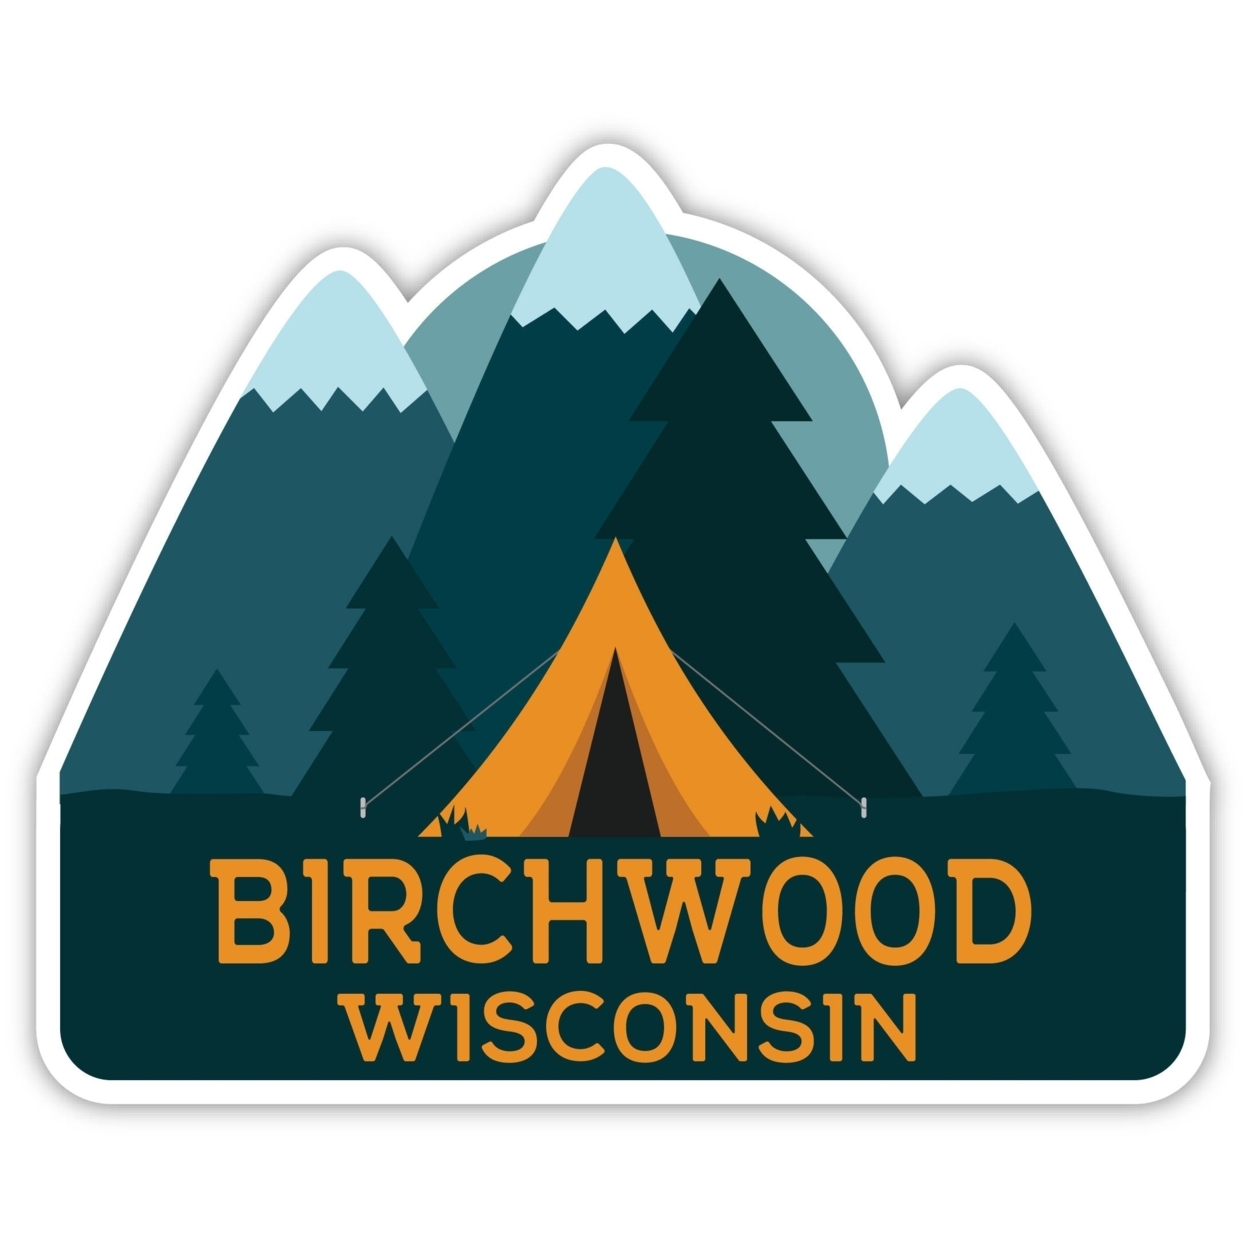 Birchwood Wisconsin Souvenir Decorative Stickers (Choose Theme And Size) - 4-Pack, 6-Inch, Tent